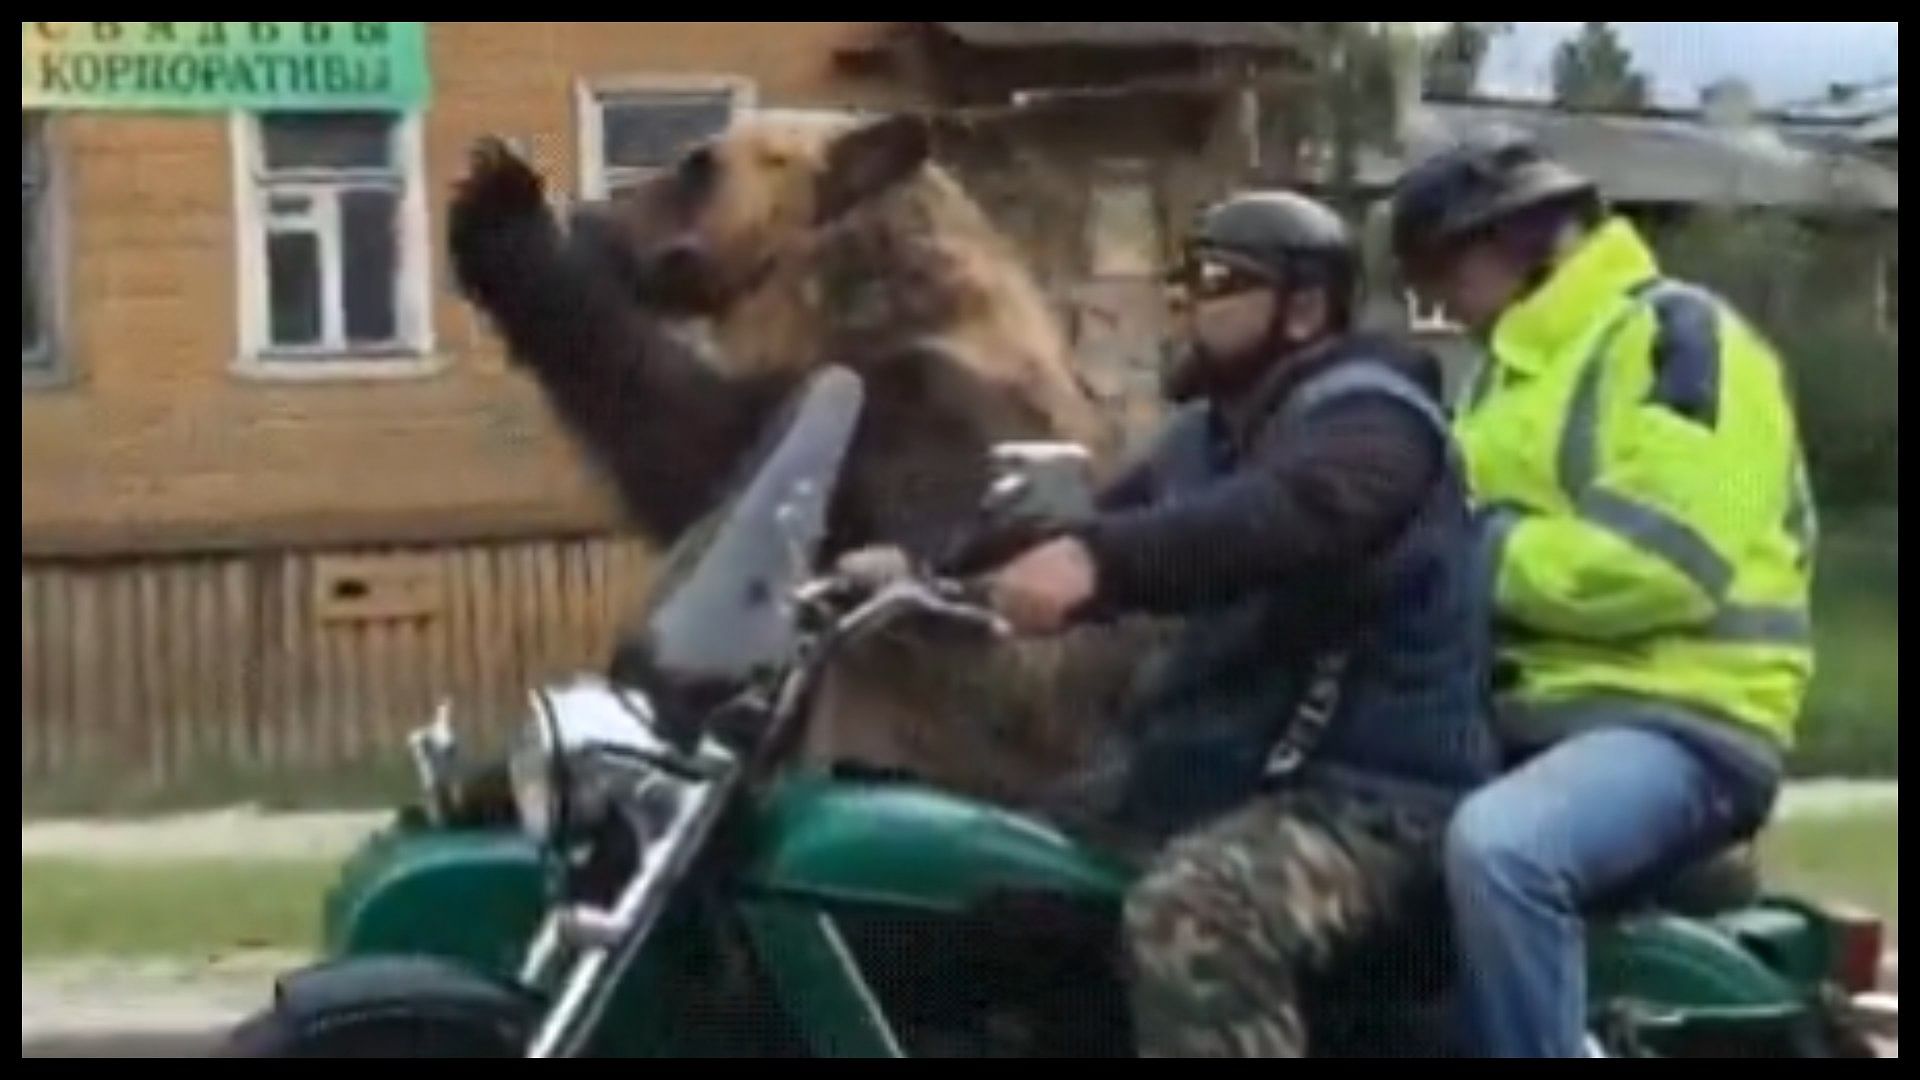 Bear riding in a motorcycle video viral on social media